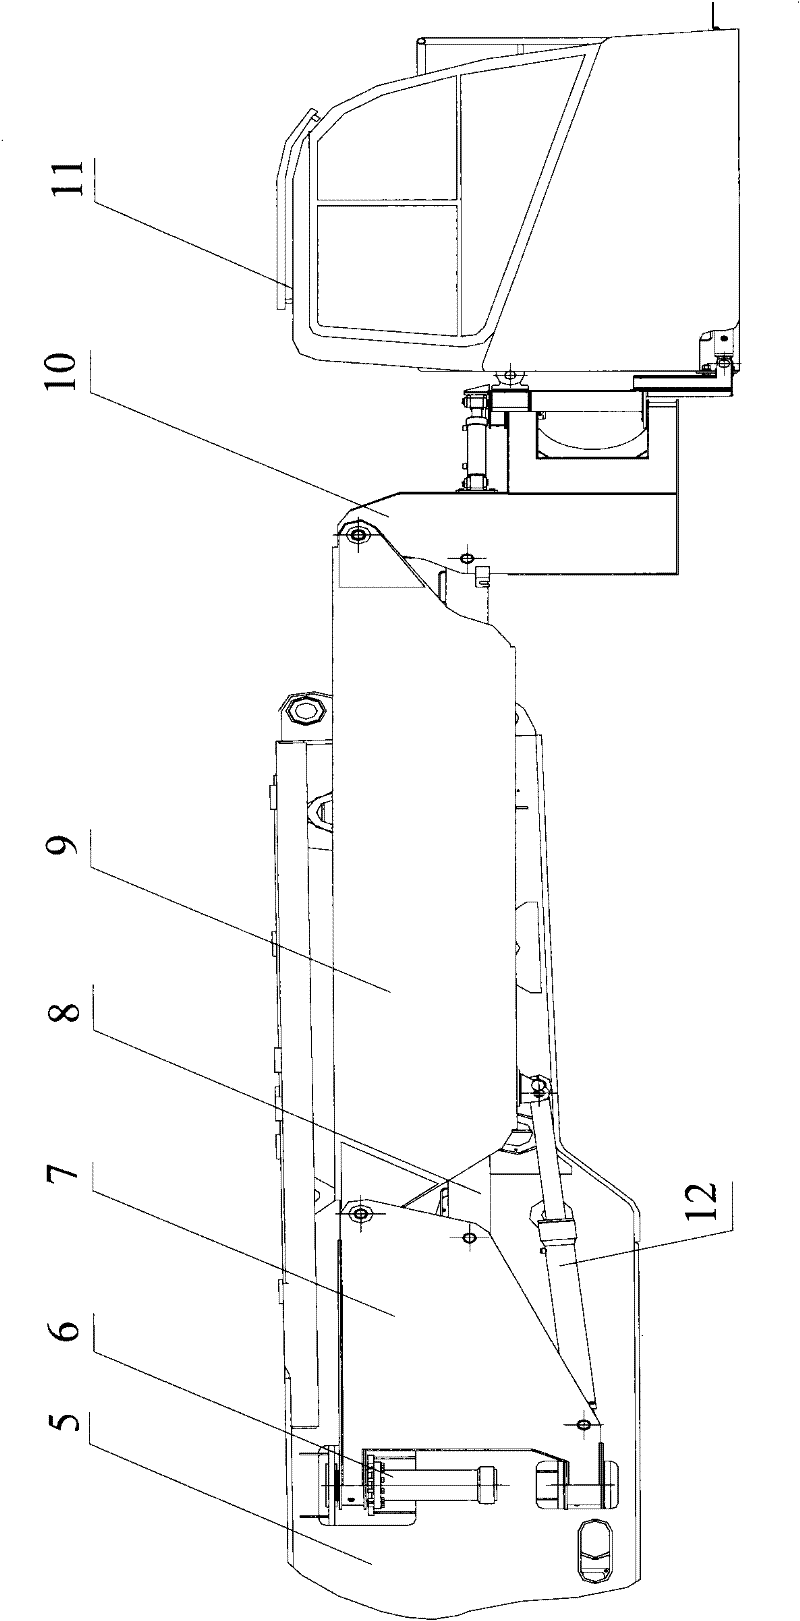 Crane and its displacement device